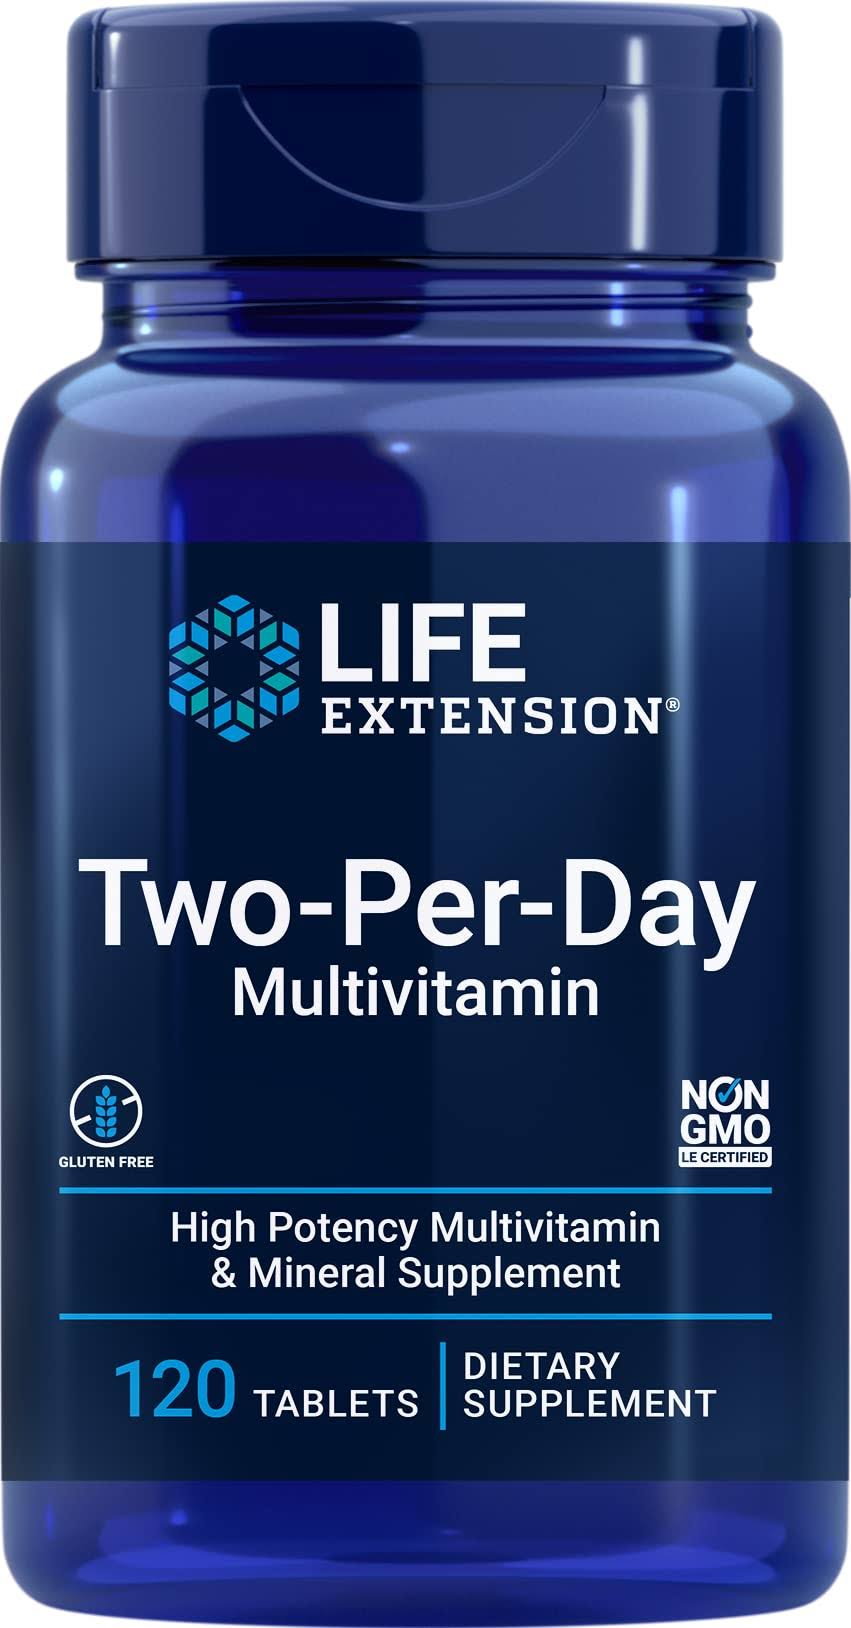 Life Extension Two Per Day Multi Vitamin and Mineral Tablets - 120ct